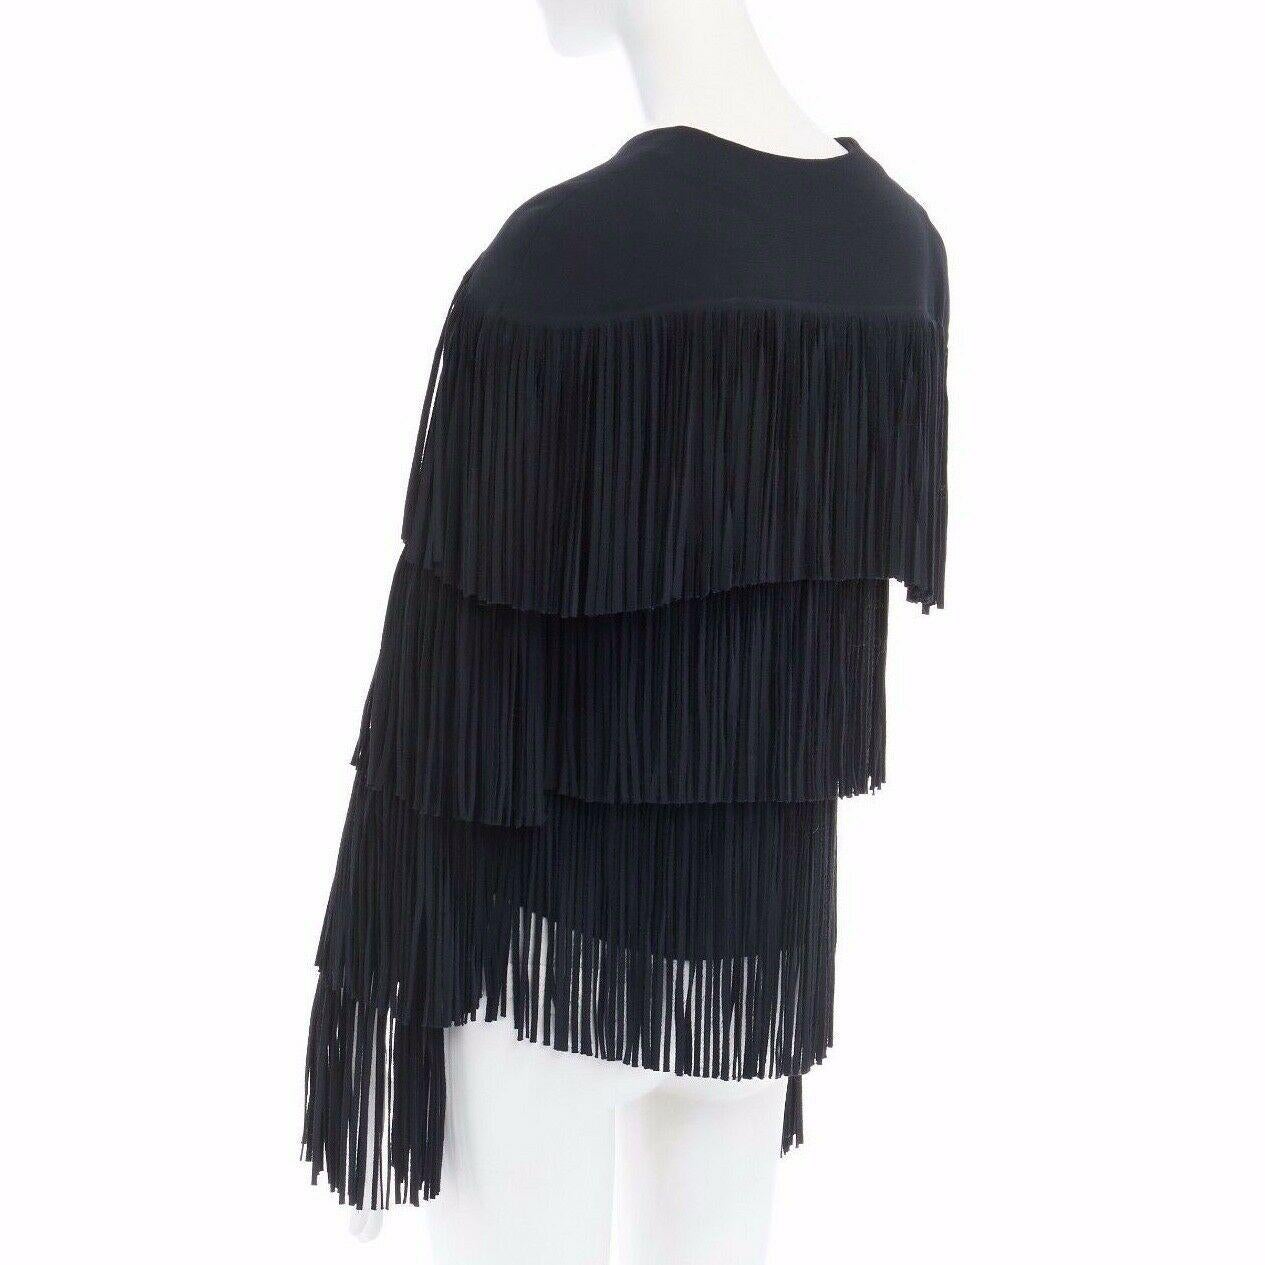 runway TOM FORD AW15 black tier fringed stretch cady open front jacket IT38 XS
TOM FORD
FROM THE FALL WINTER 2015 RUNWAY
Black stretch-cady . 
Open front . 
Collarless . 
Tiered long fringing . 
Long sleeves . 
Fully lined in silk . 
Made in